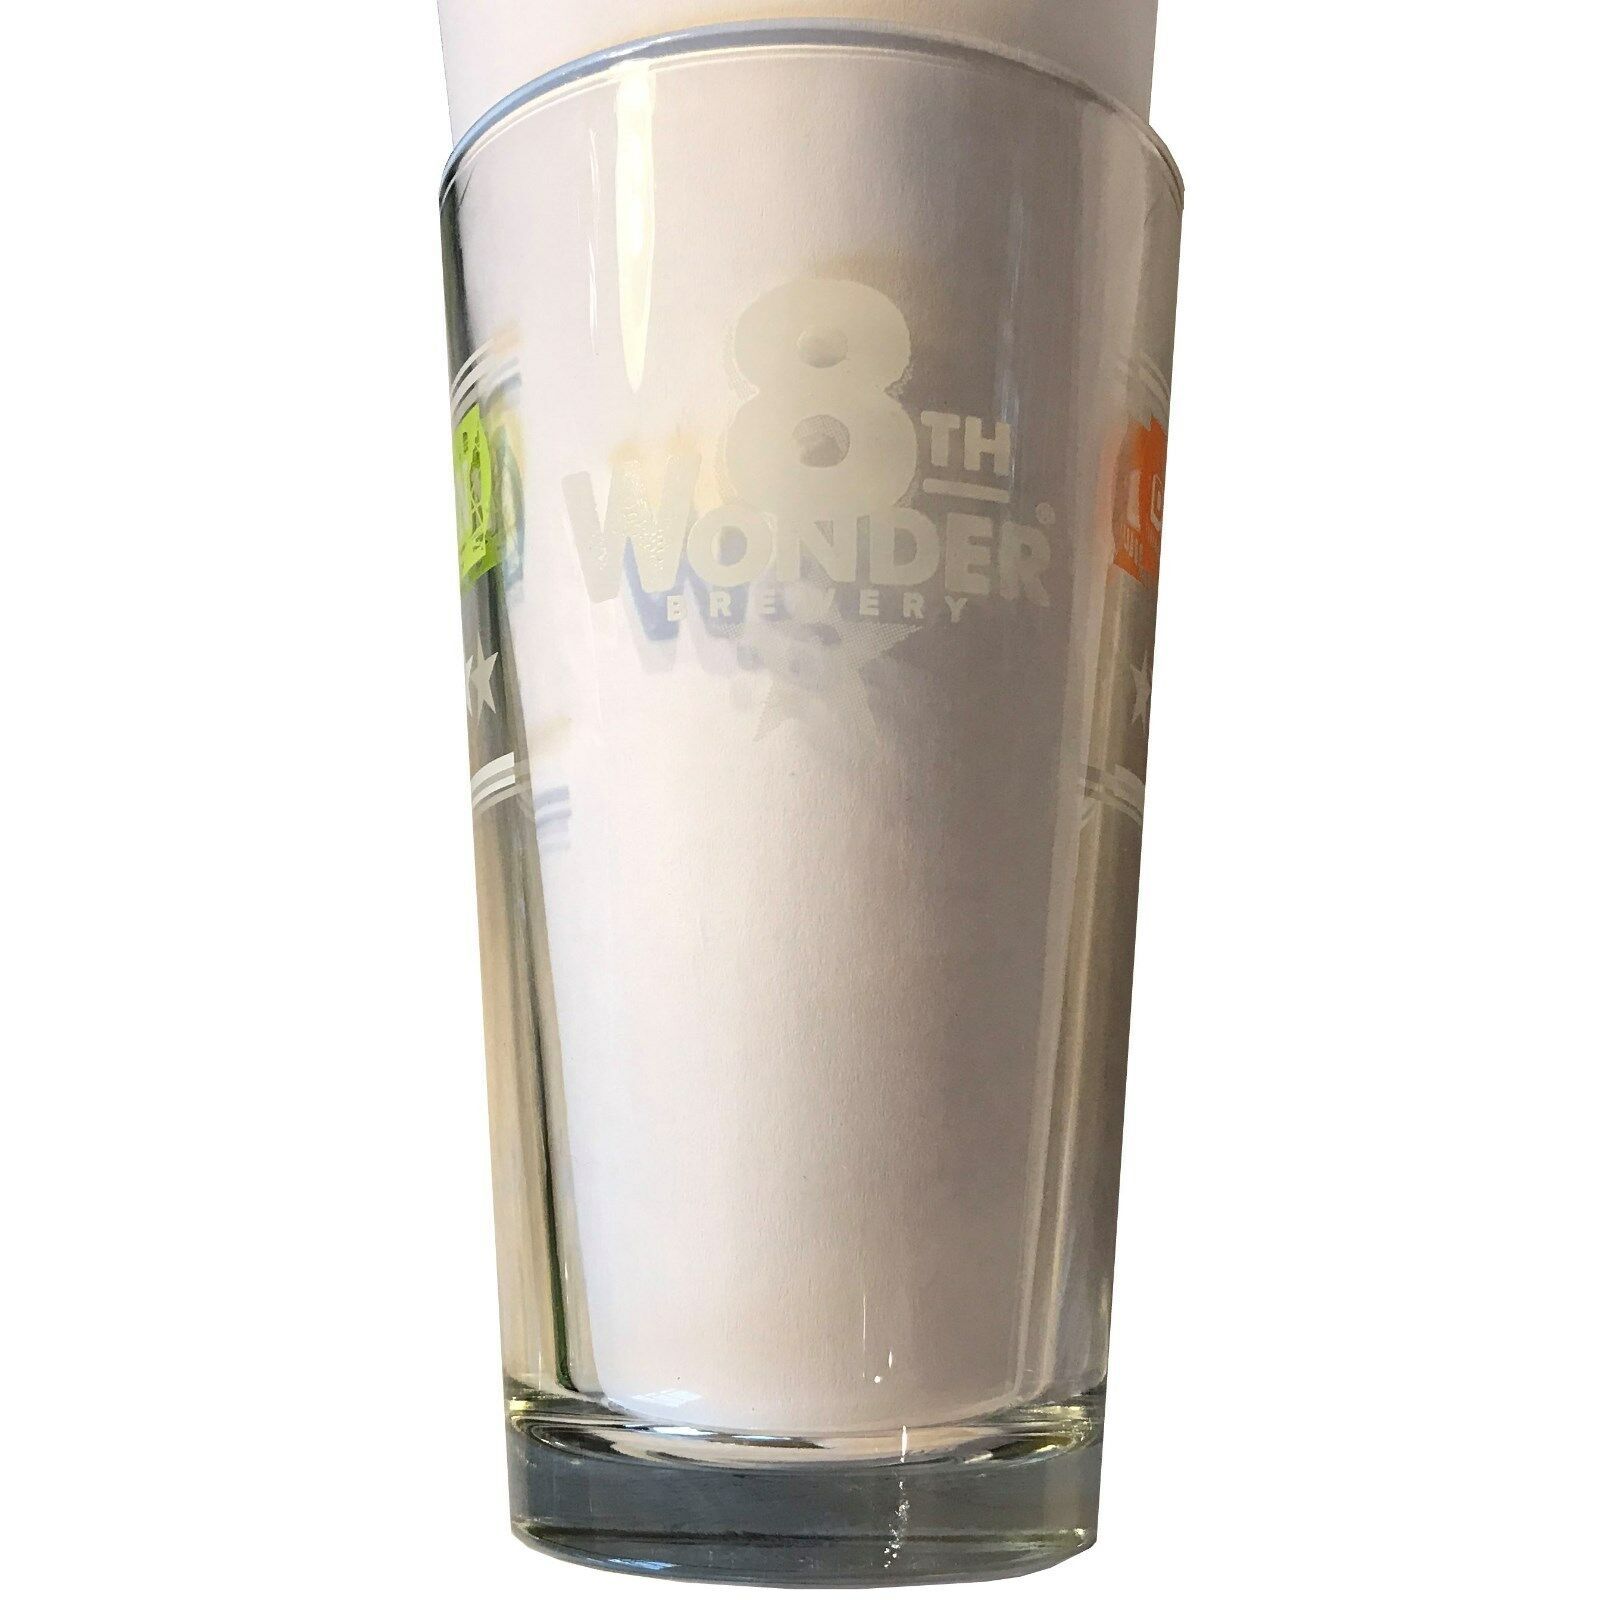 Primary image for 8th Wonder Brewery, Pint Glass ~ Perfect used condition